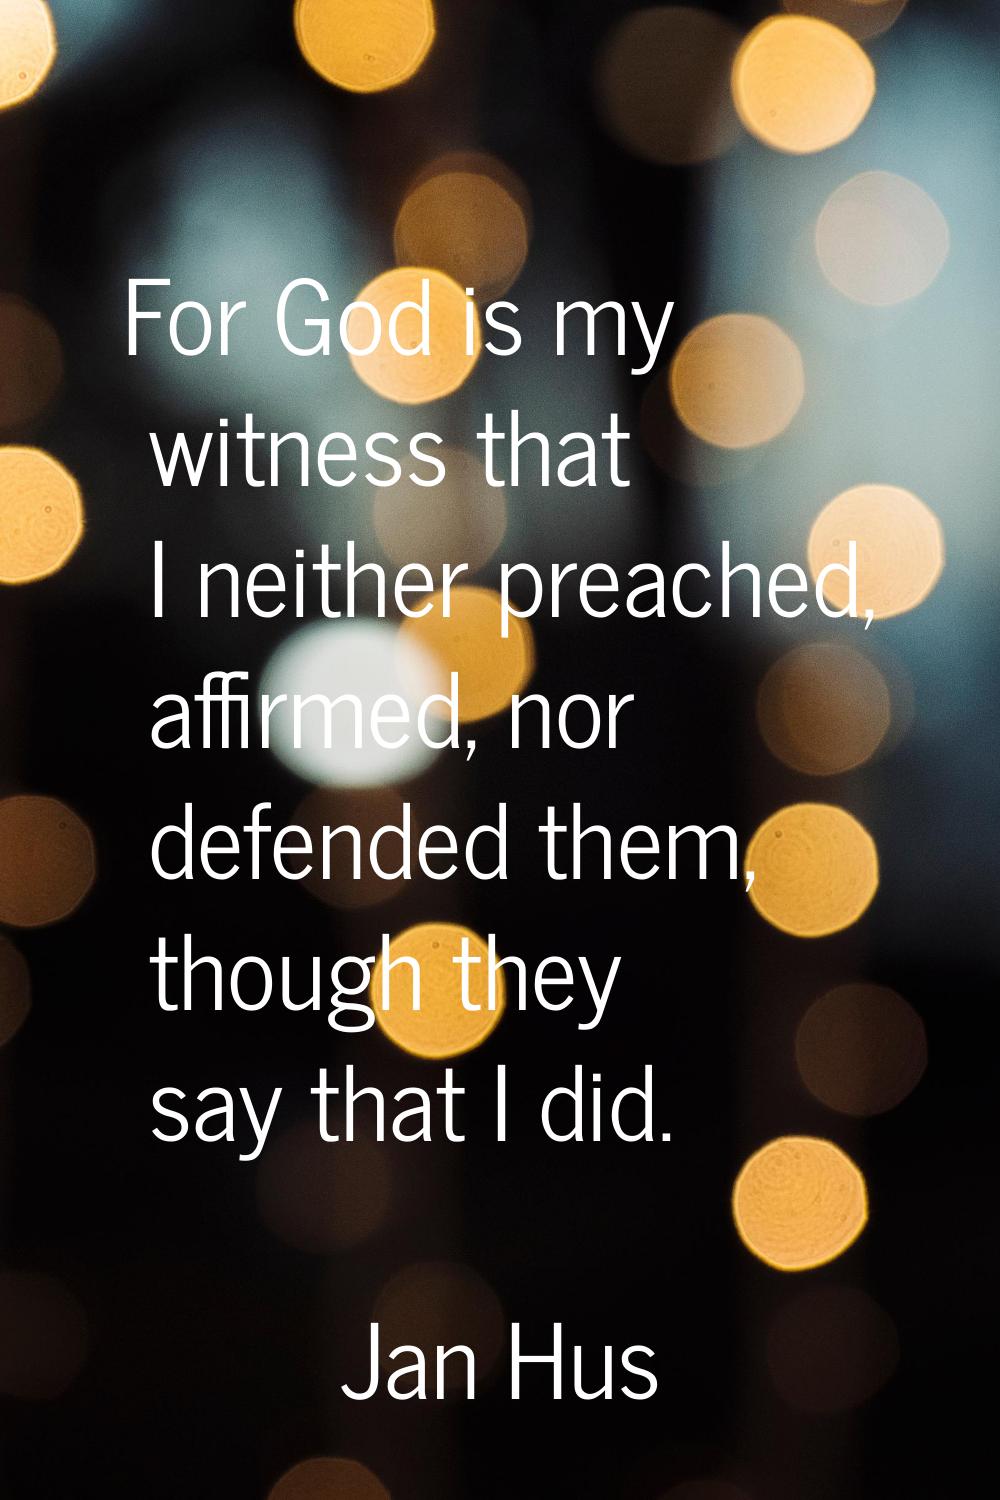 For God is my witness that I neither preached, affirmed, nor defended them, though they say that I 